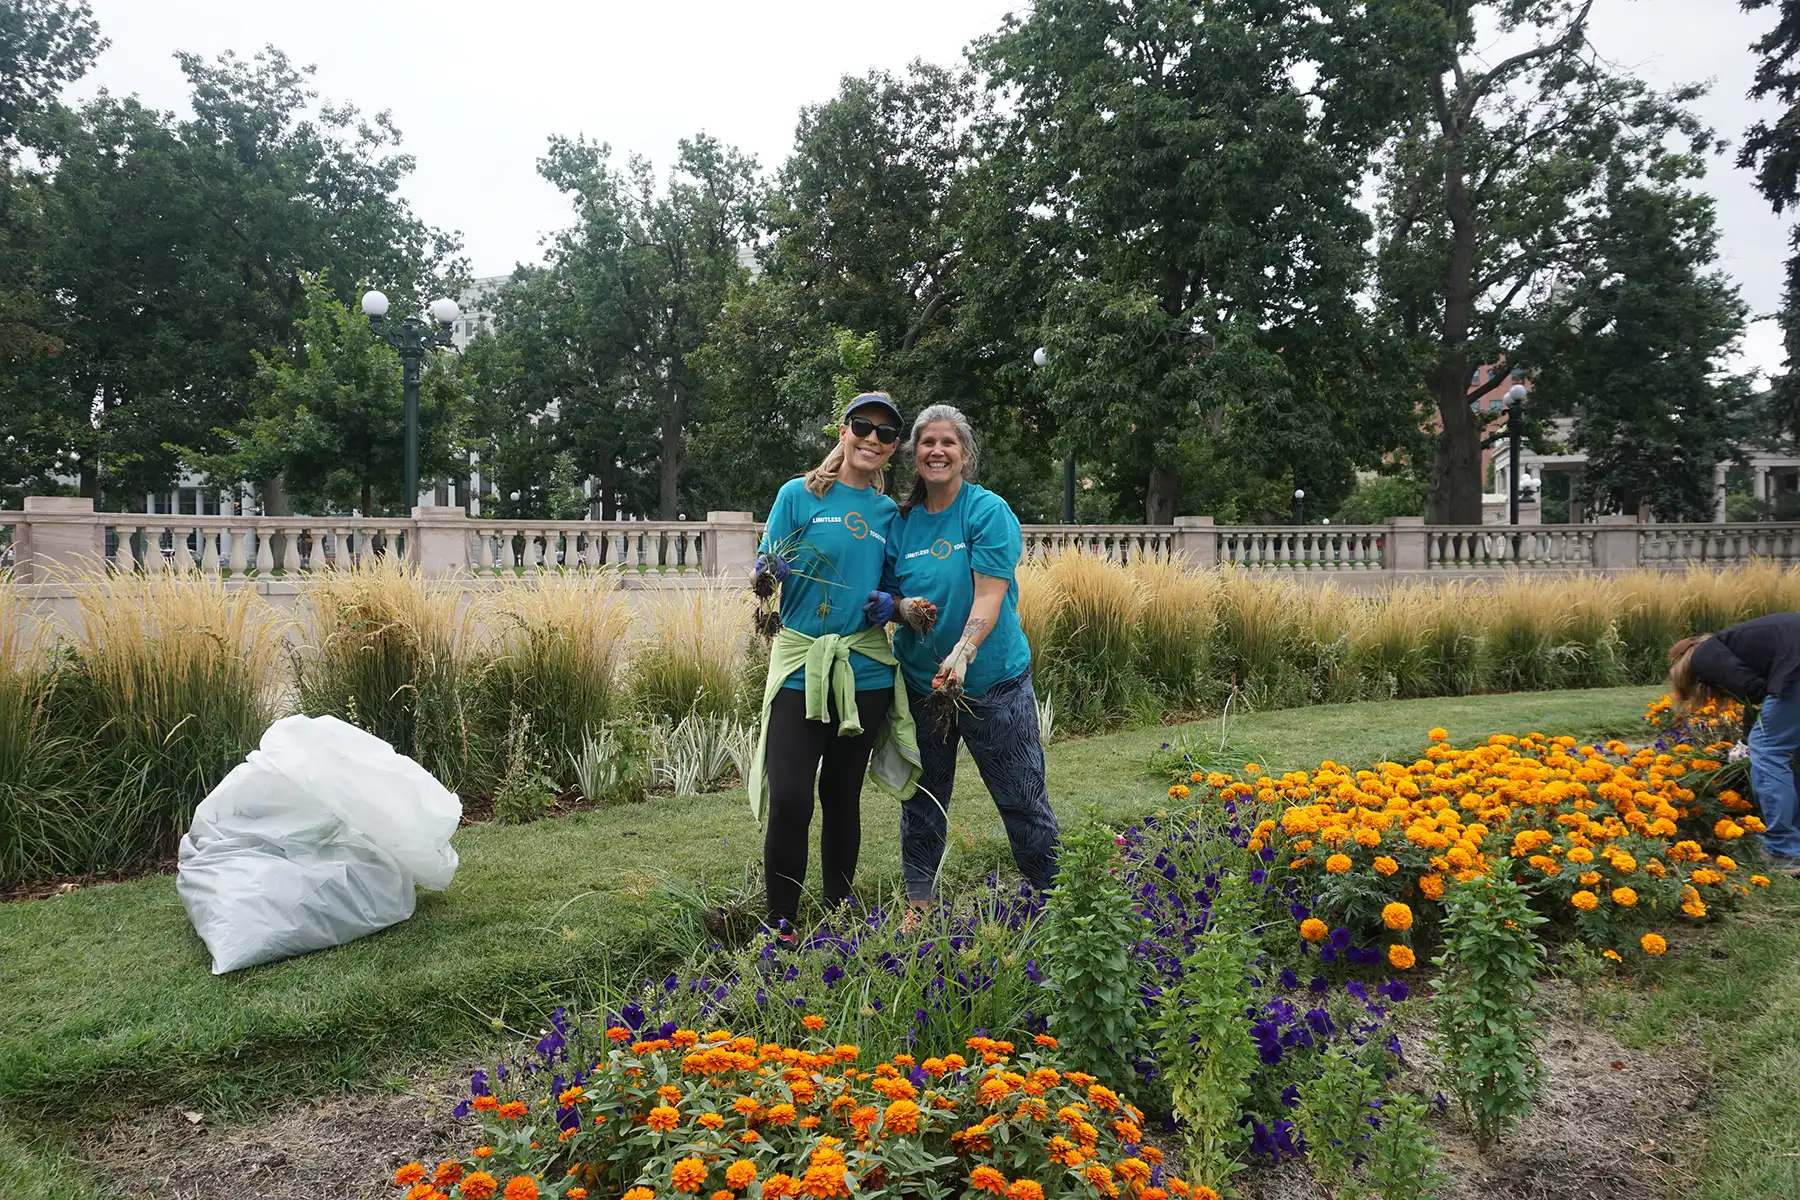 Two volunteers cleaning up the park, stopping to pose for a photo